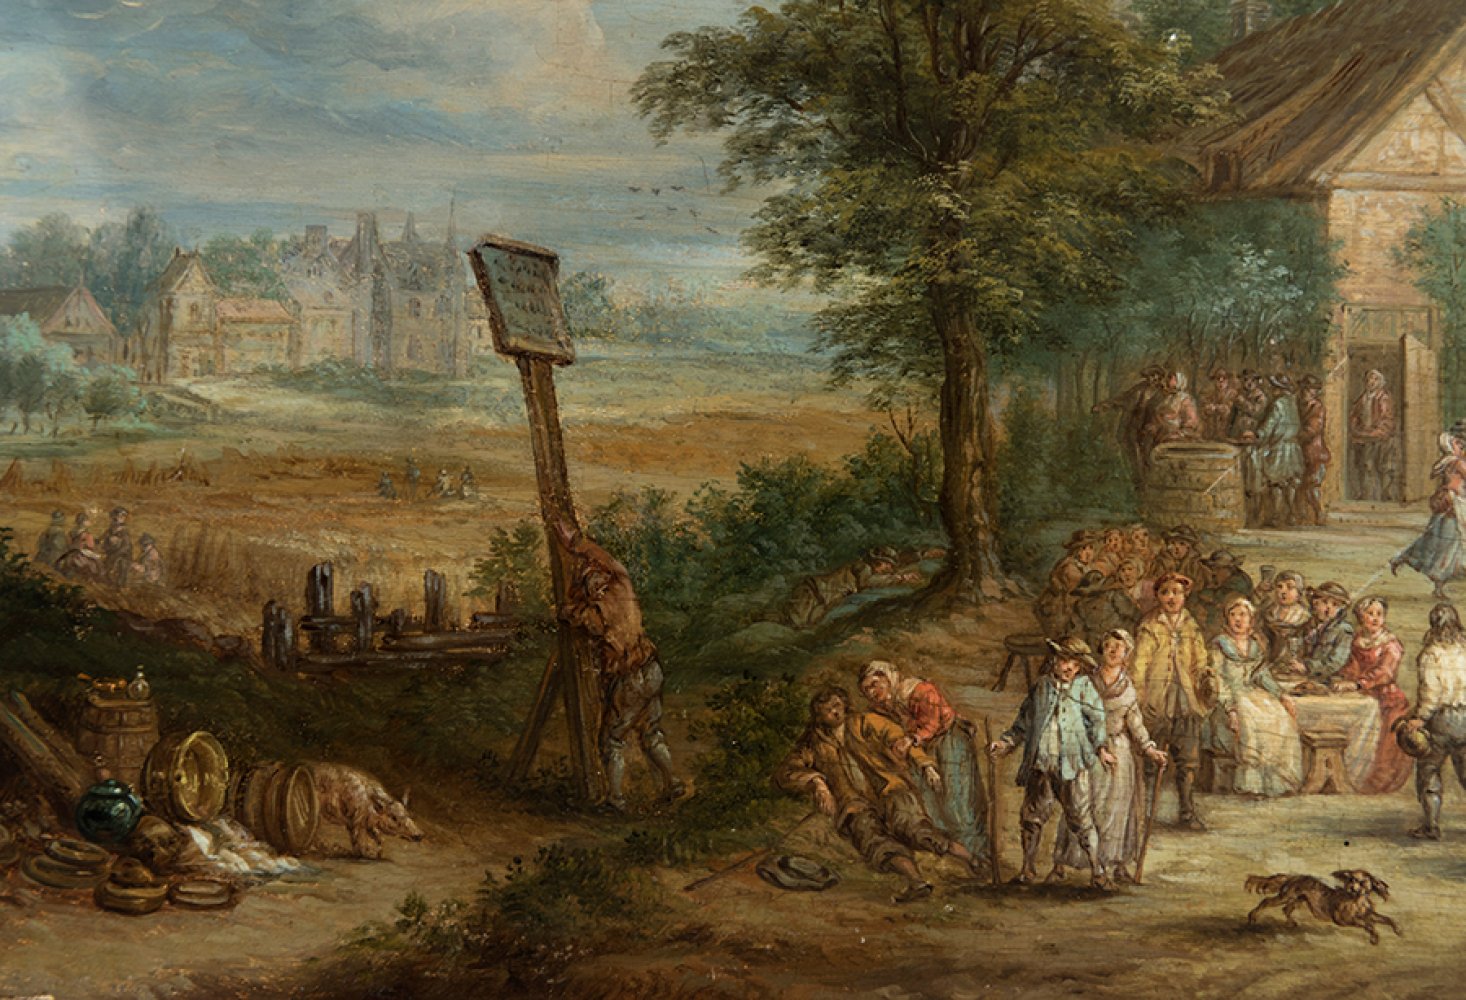 Dutch school; early 18th century."Landscape with Figures.Oil on panel.Measurements: 18,5 x 24,5 cm. - Image 5 of 5